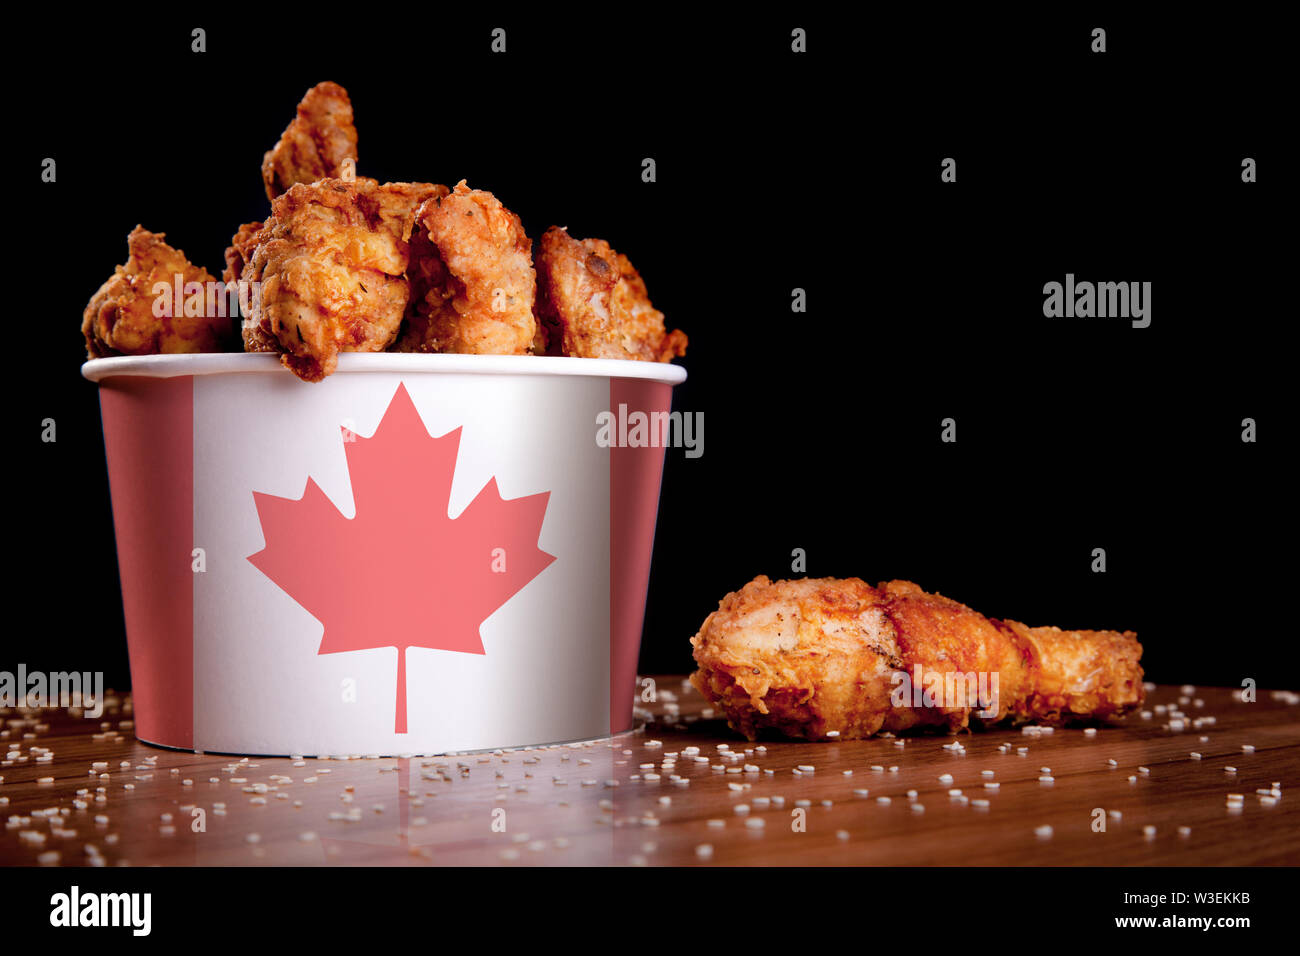 bbq-chicken-wings-in-bucket-flag-of-canada-on-a-wooden-table-and-black-background-W3EKKB.jpg